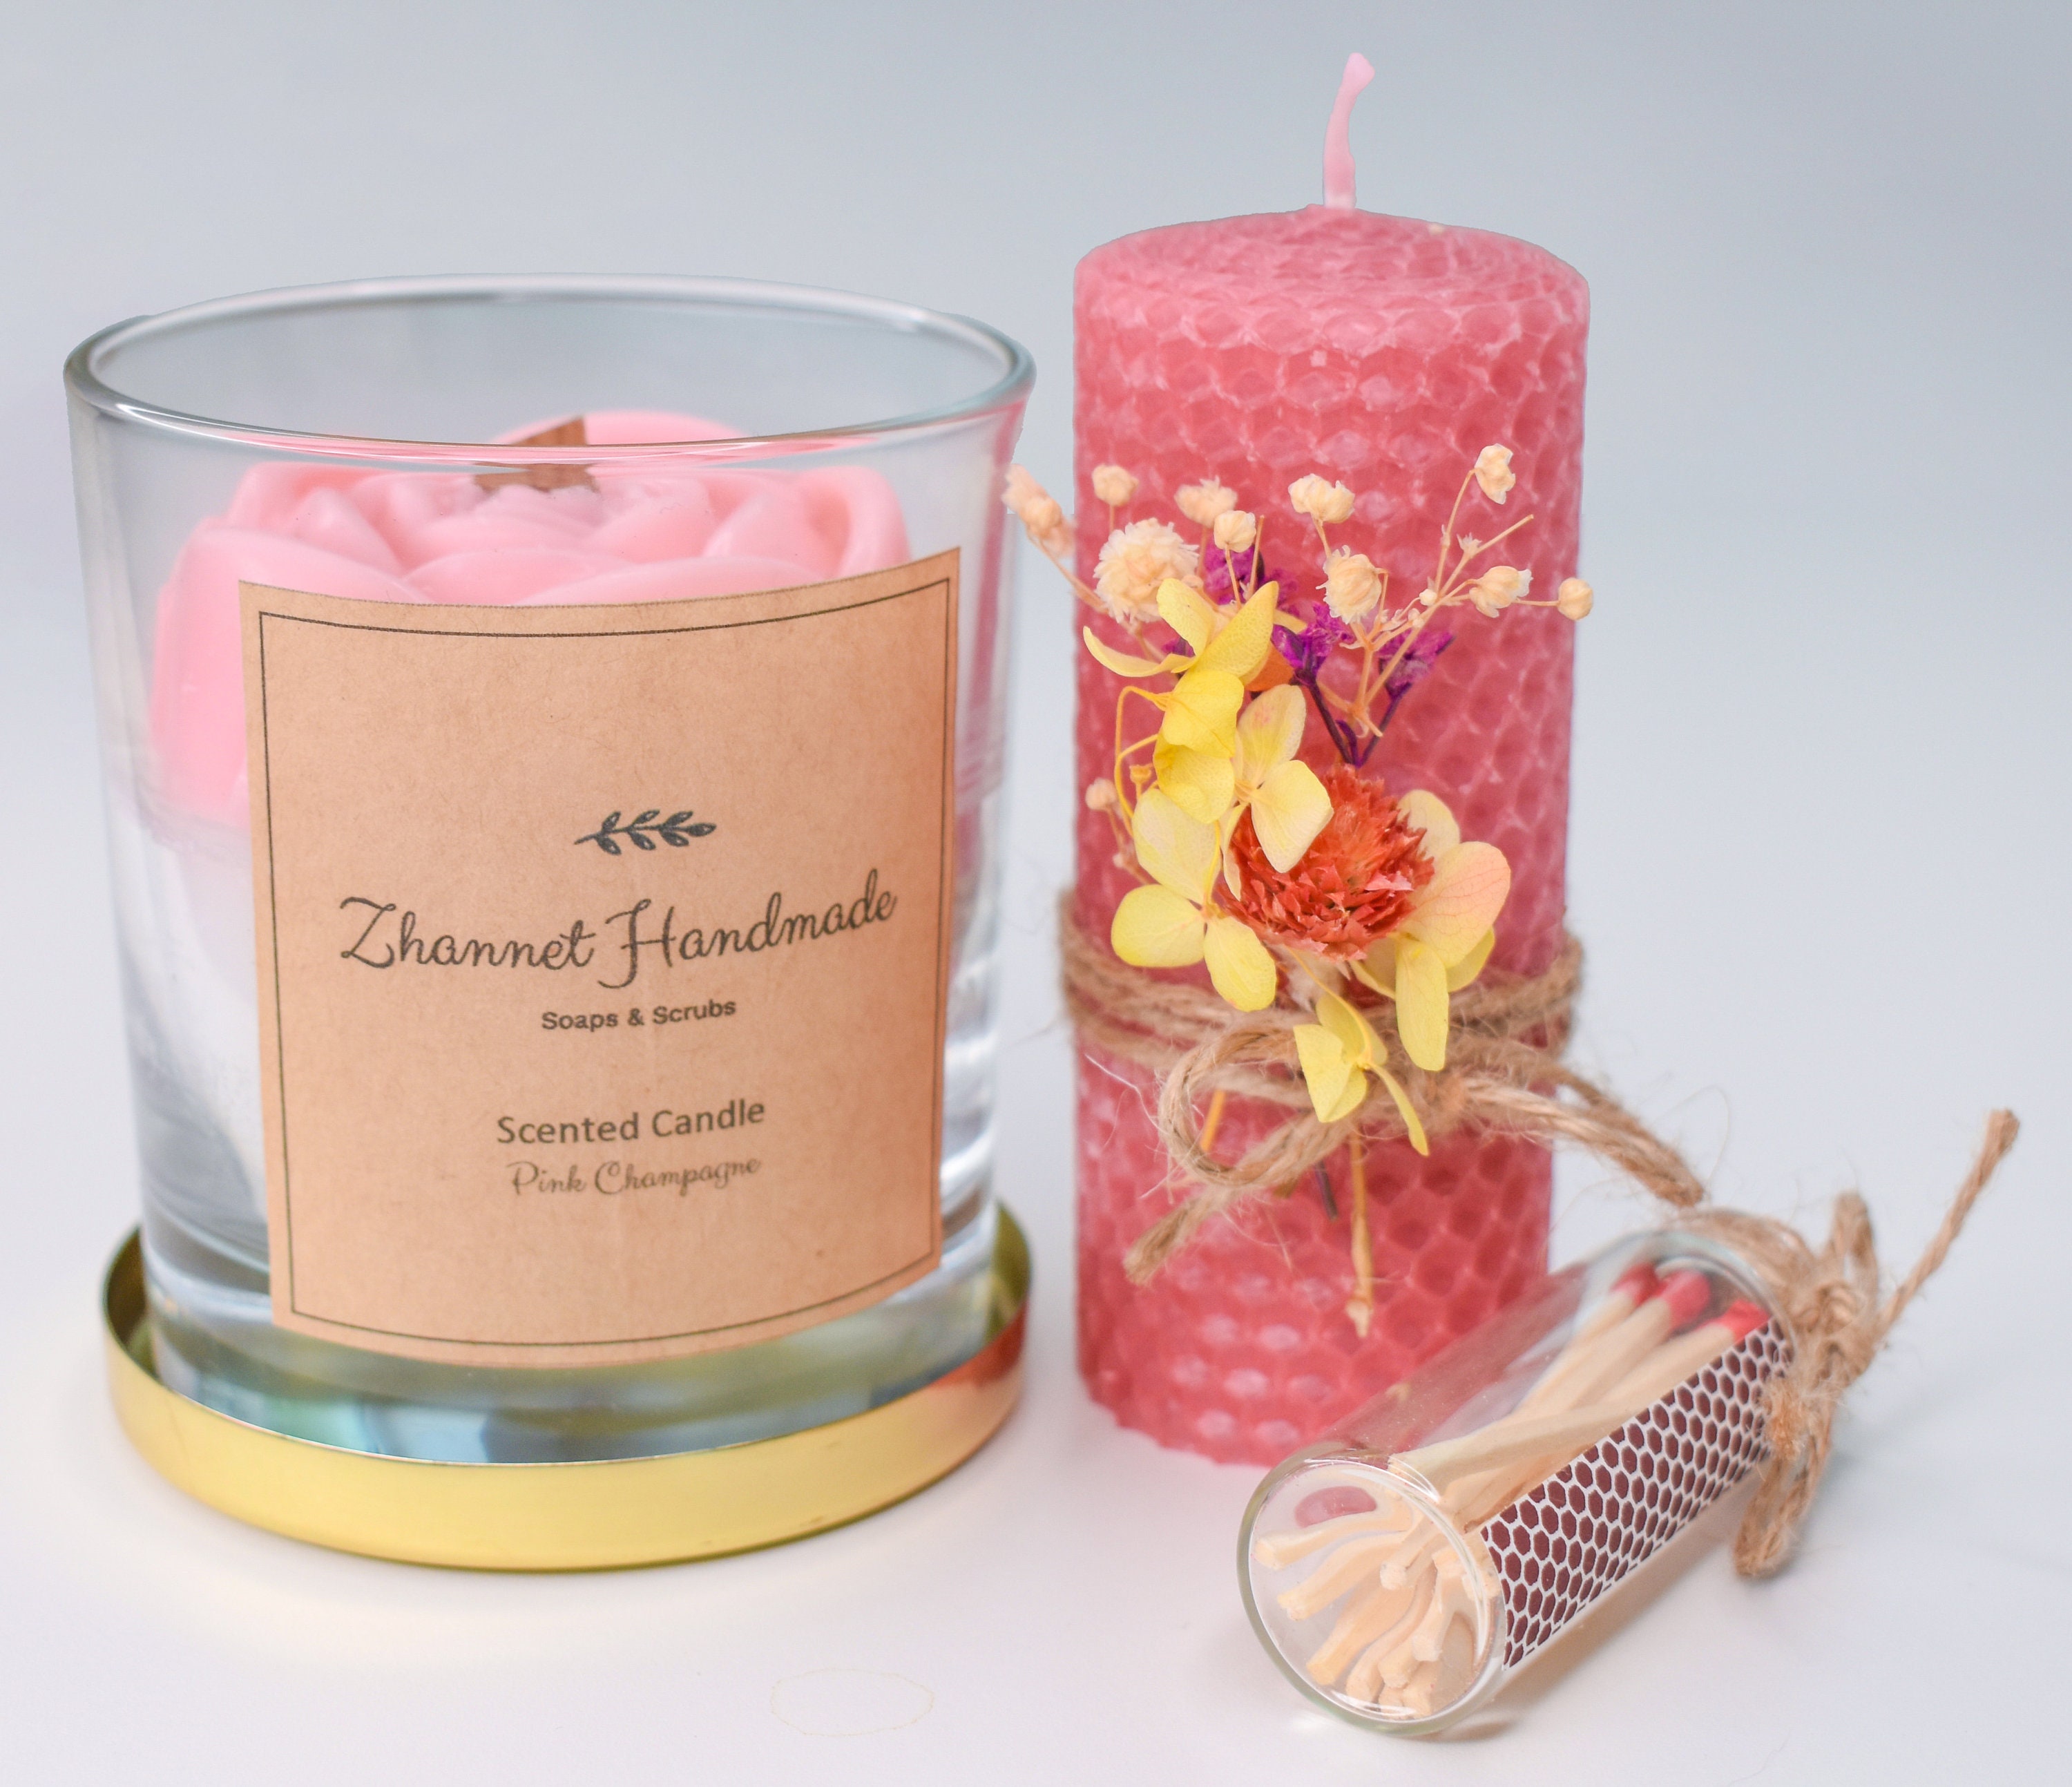 Beeswax Candle Making Kit - Great For Celebrations And Christmas - No Heat  Involved So Can Be Enjoyed With Children